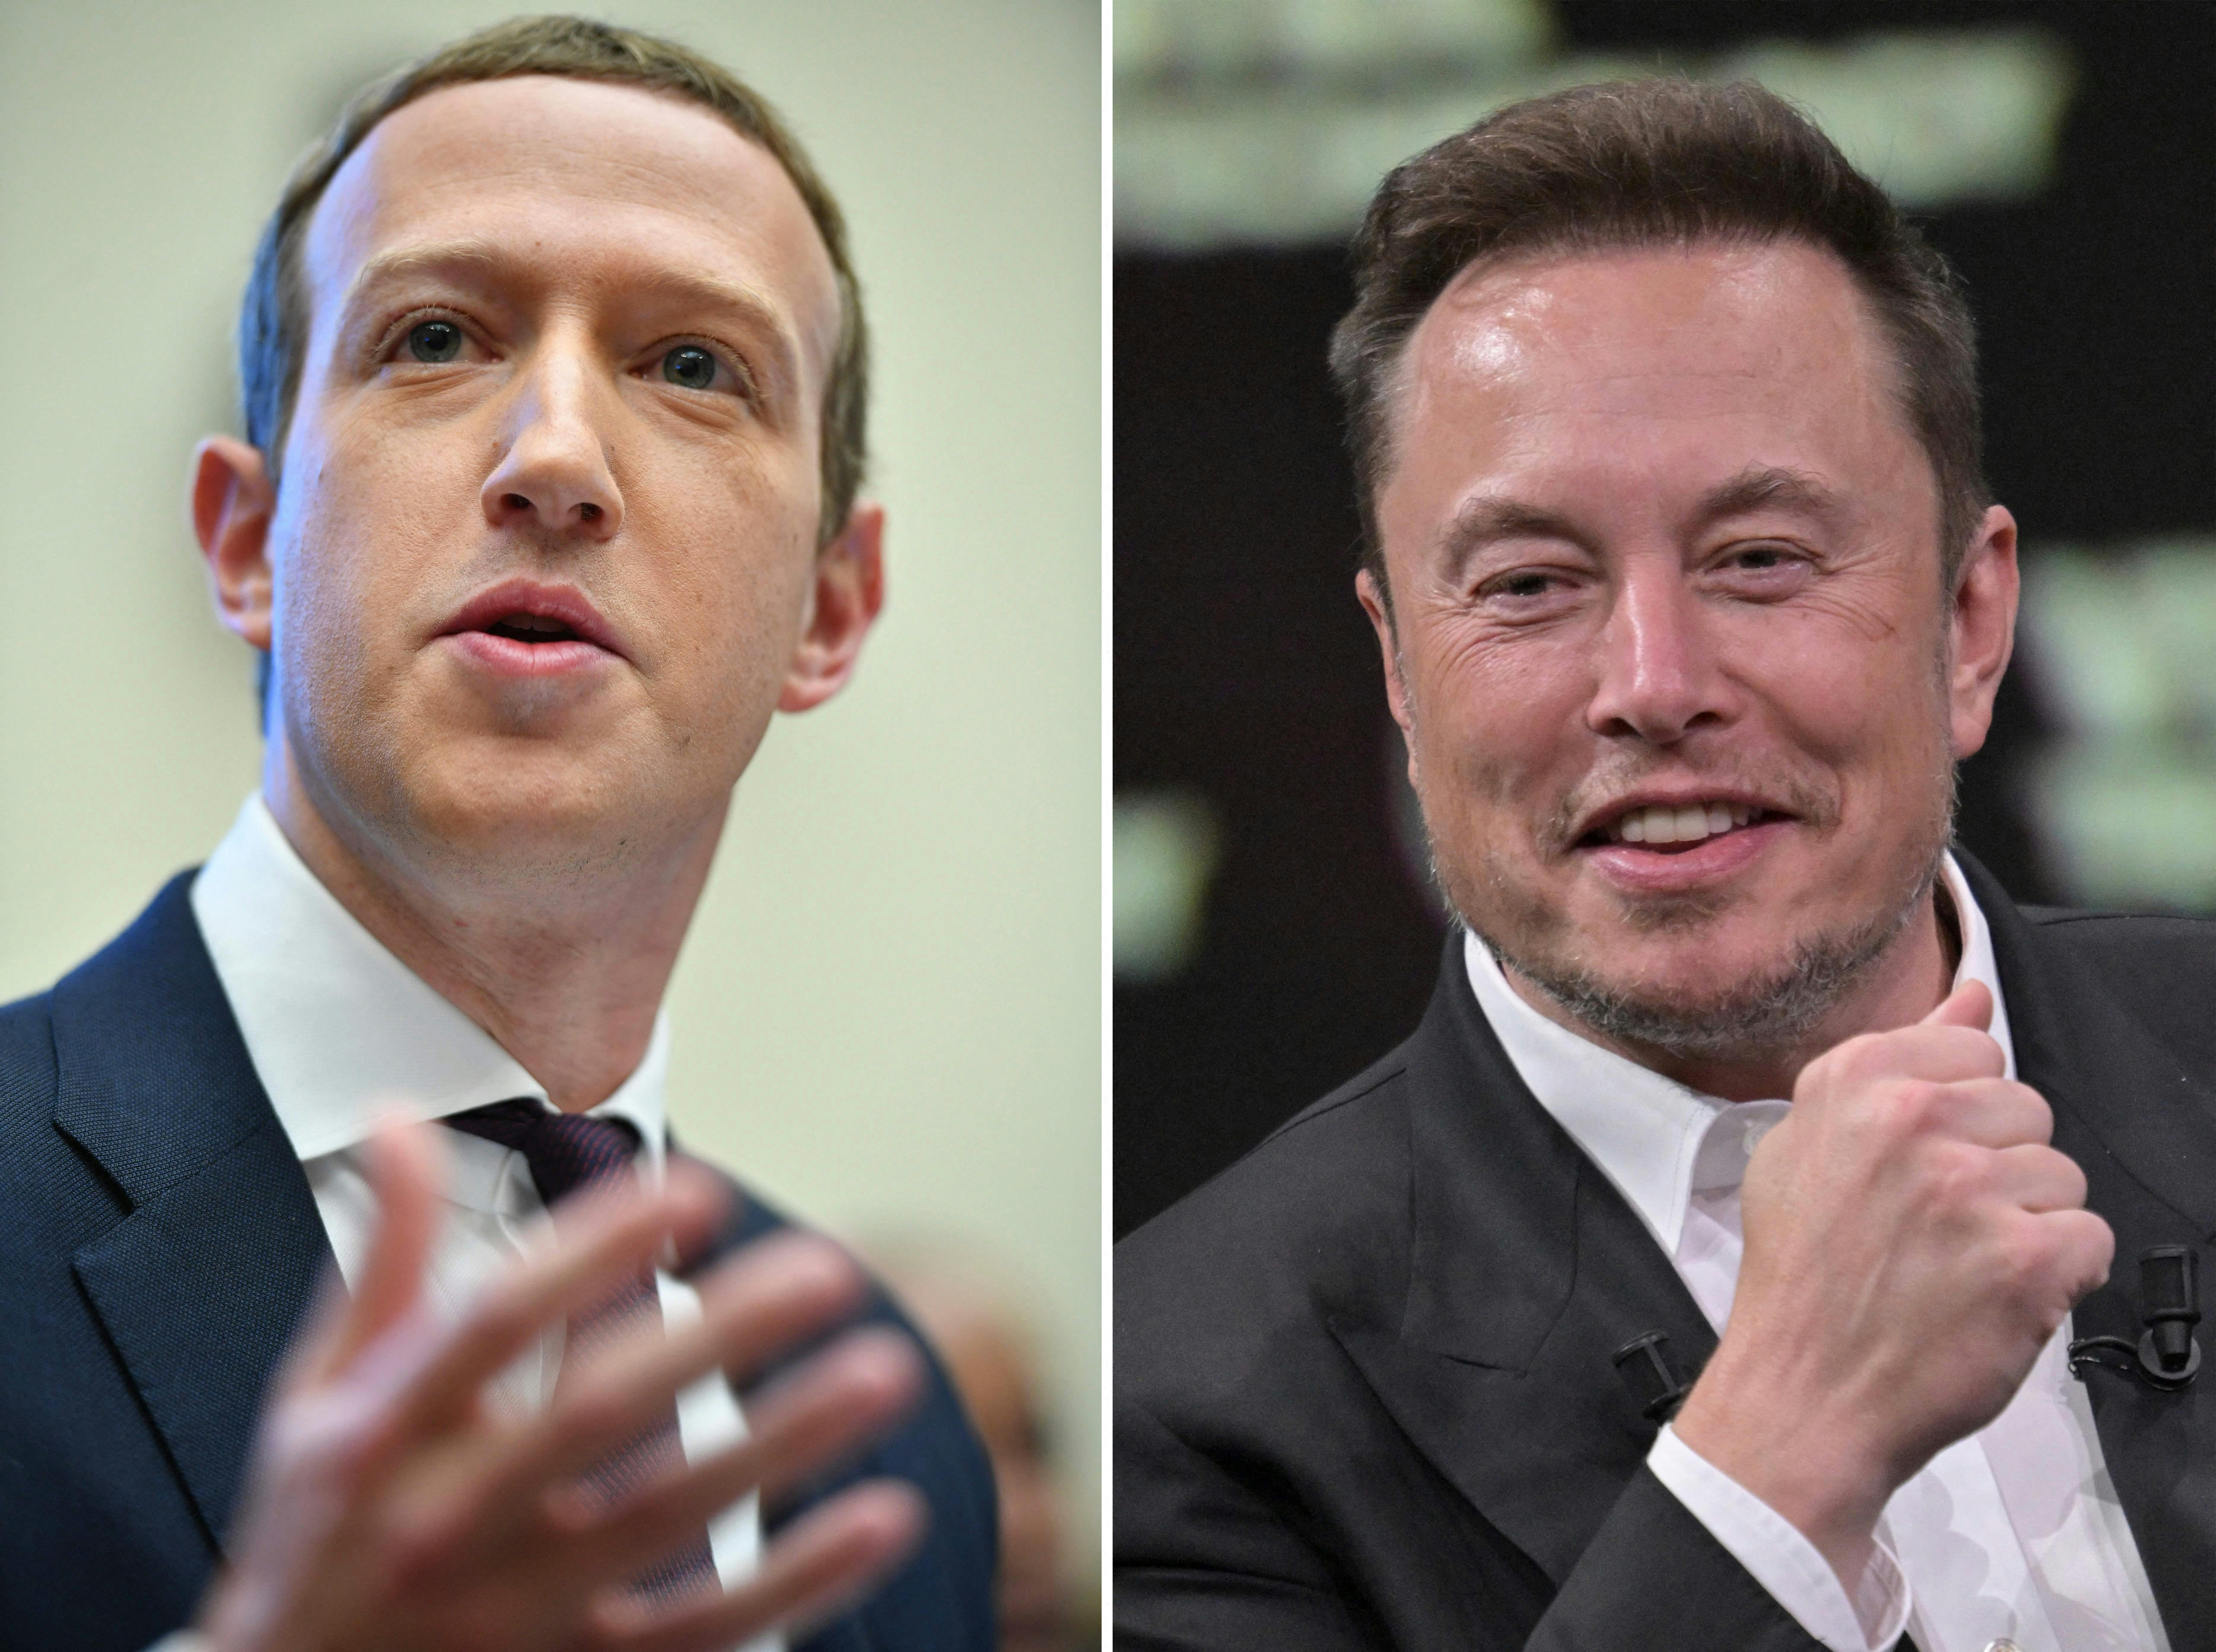 Elon Musks Fight With Mark Zuckerberg Enters Dick Measuring Stage The New Republic pic pic photo